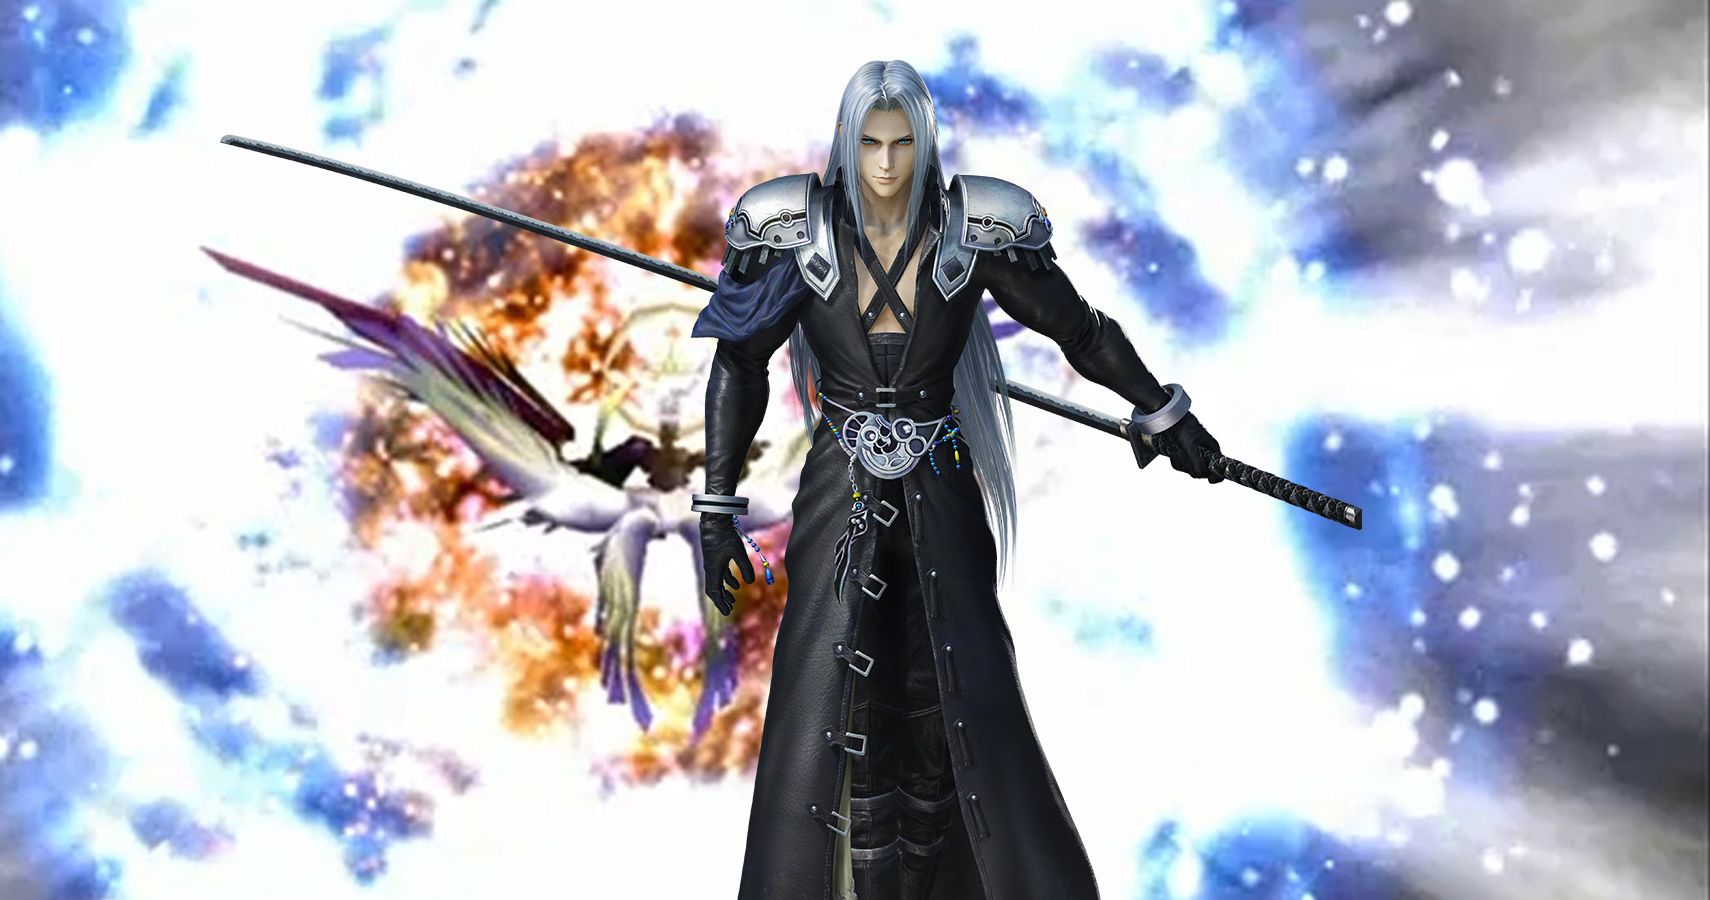 Final Fantasy VII Sephiroth’s Supernova Explained (How He Keeps Blowing Up The World)